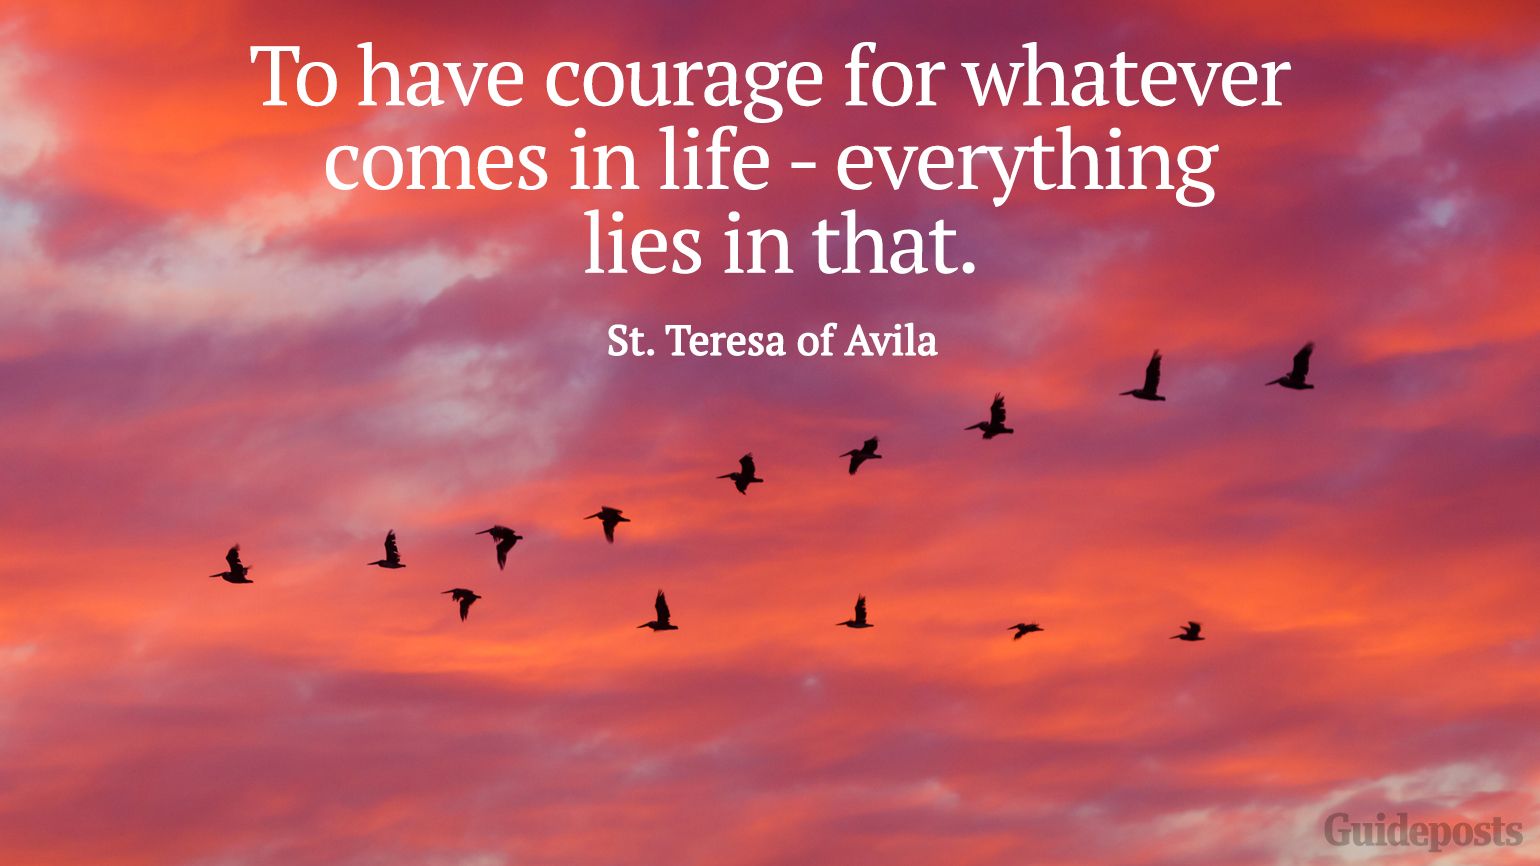 To have courage for whatever comes in life - everything lies in that.